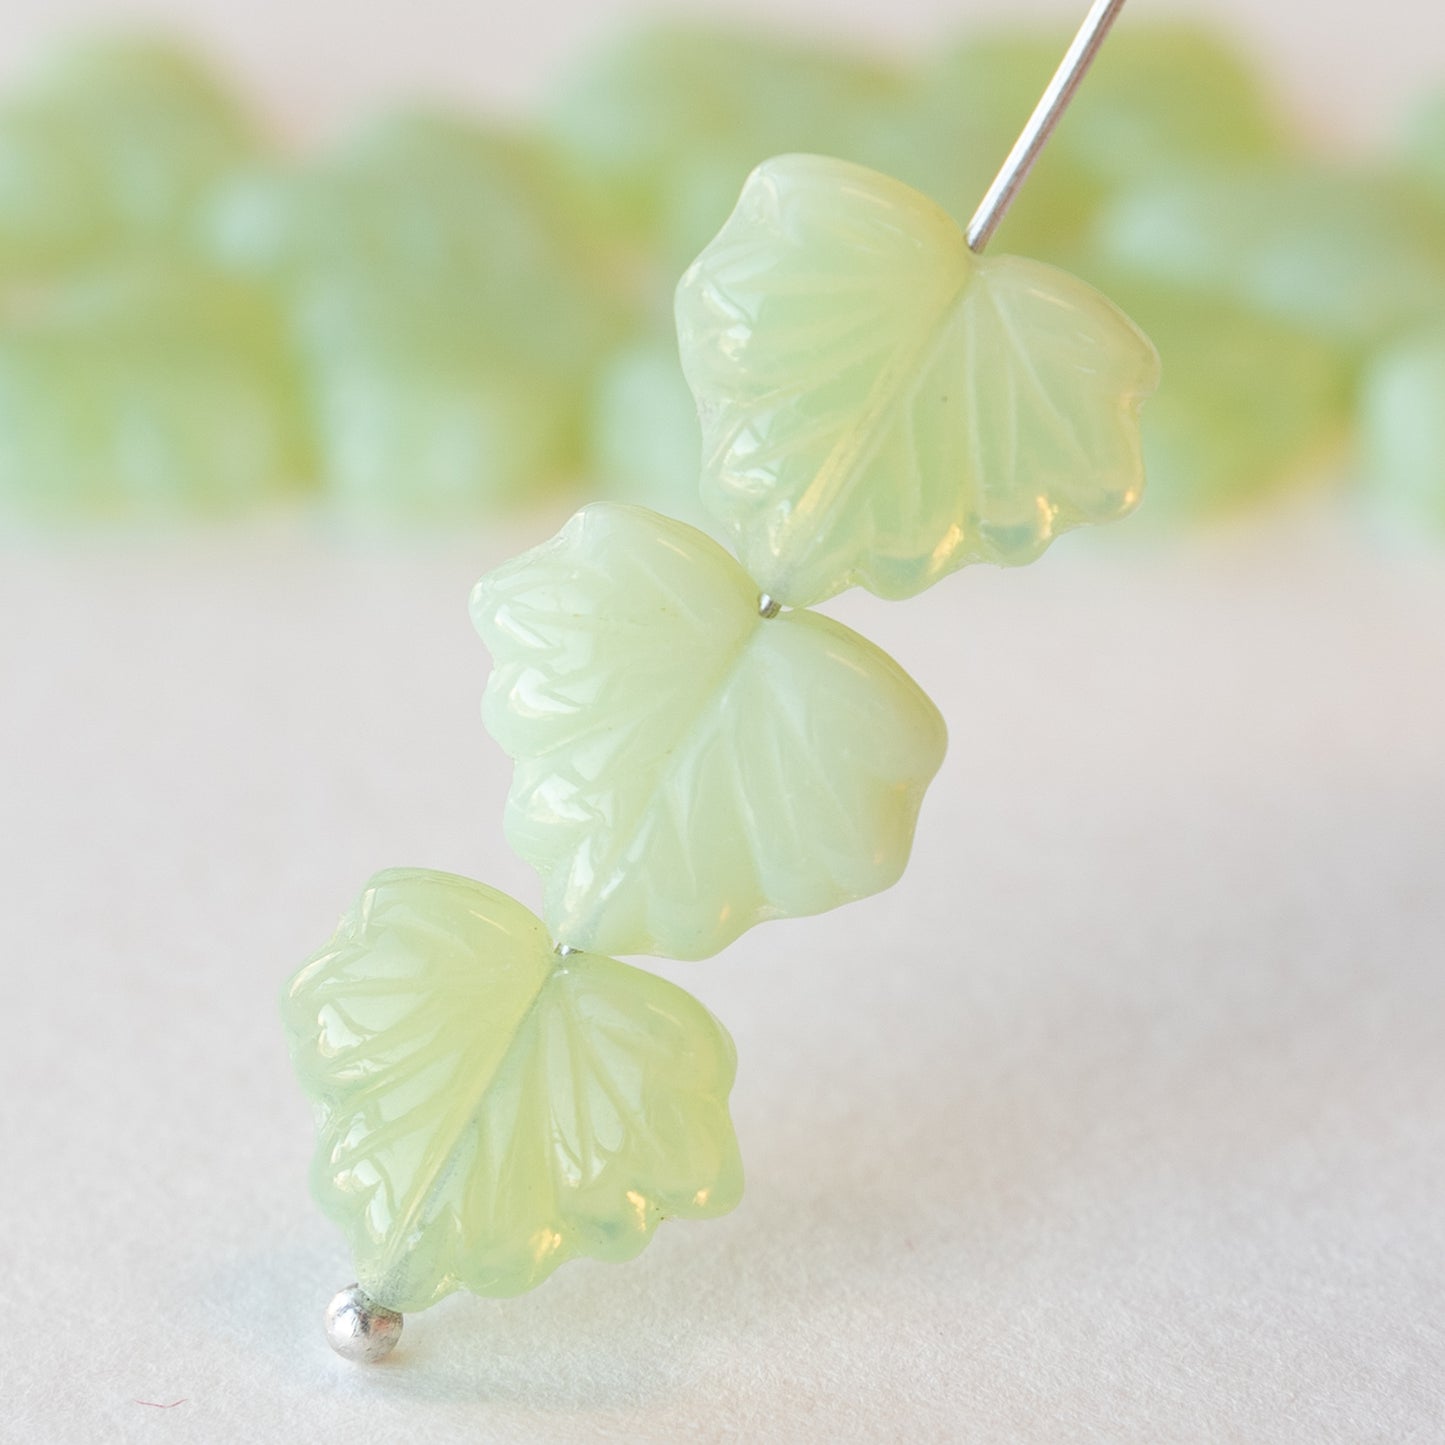 13mm Maple Leaf Beads -  Light Opaline Green - 10 or 20 Beads